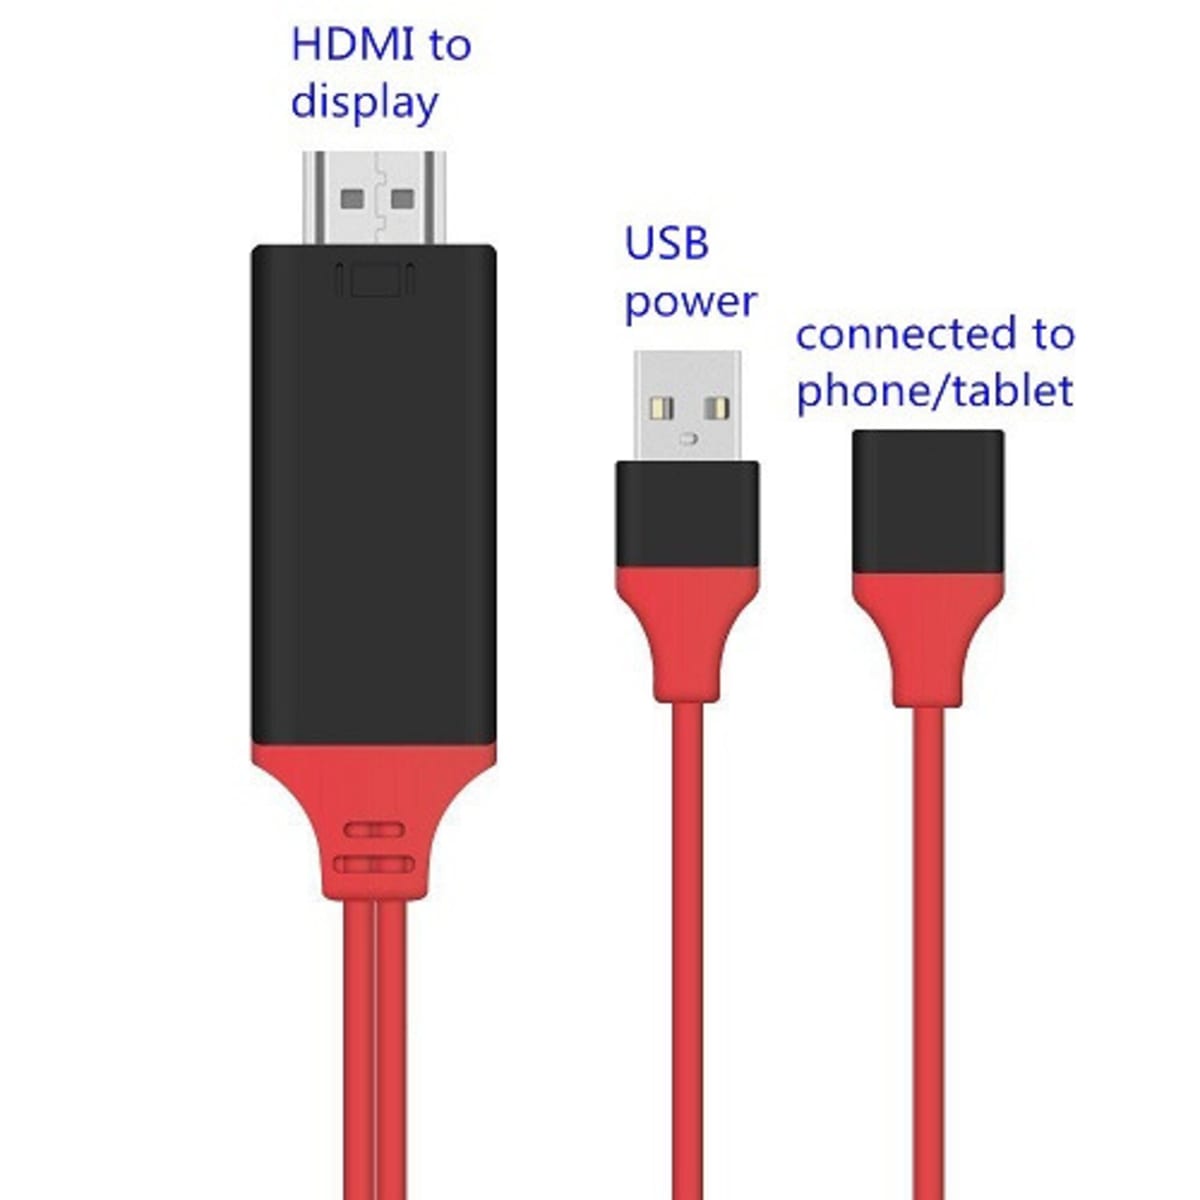 CE Phone To HDMI Cable for iOS and Android Devices to HDTV - to TV/Projector or Monitor | Konga Online Shopping